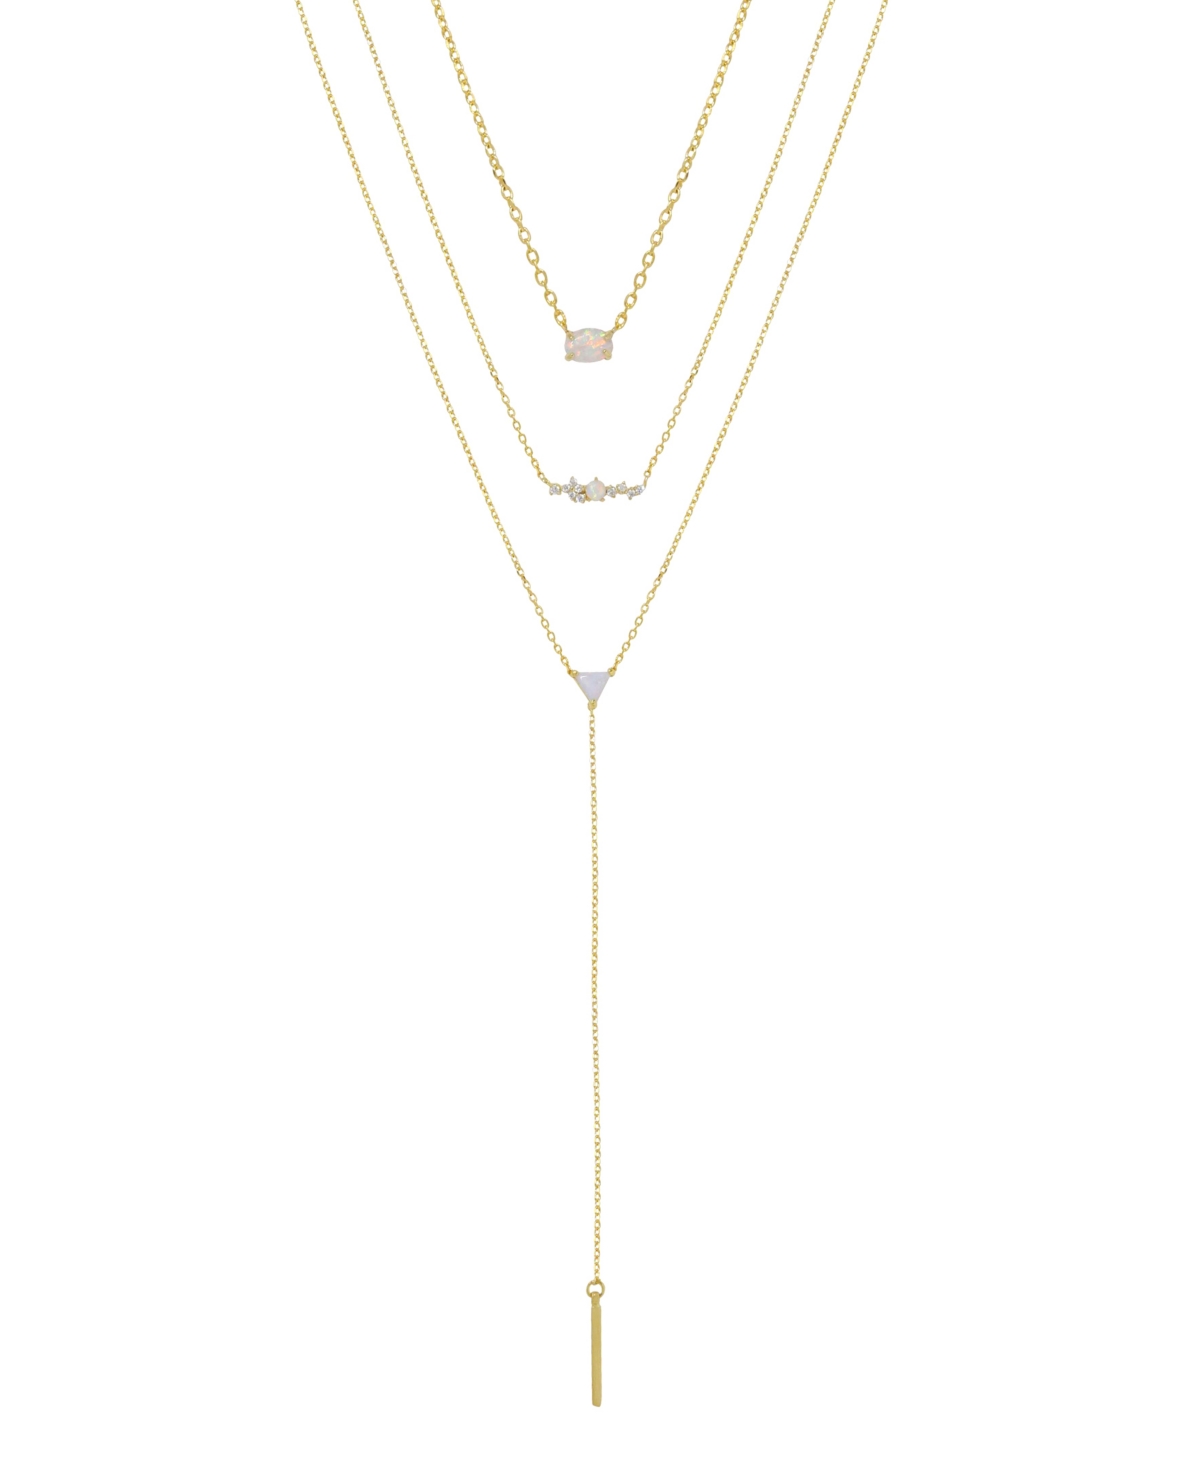 Layered Opal Lariat Necklace, Set of 3 - Gold